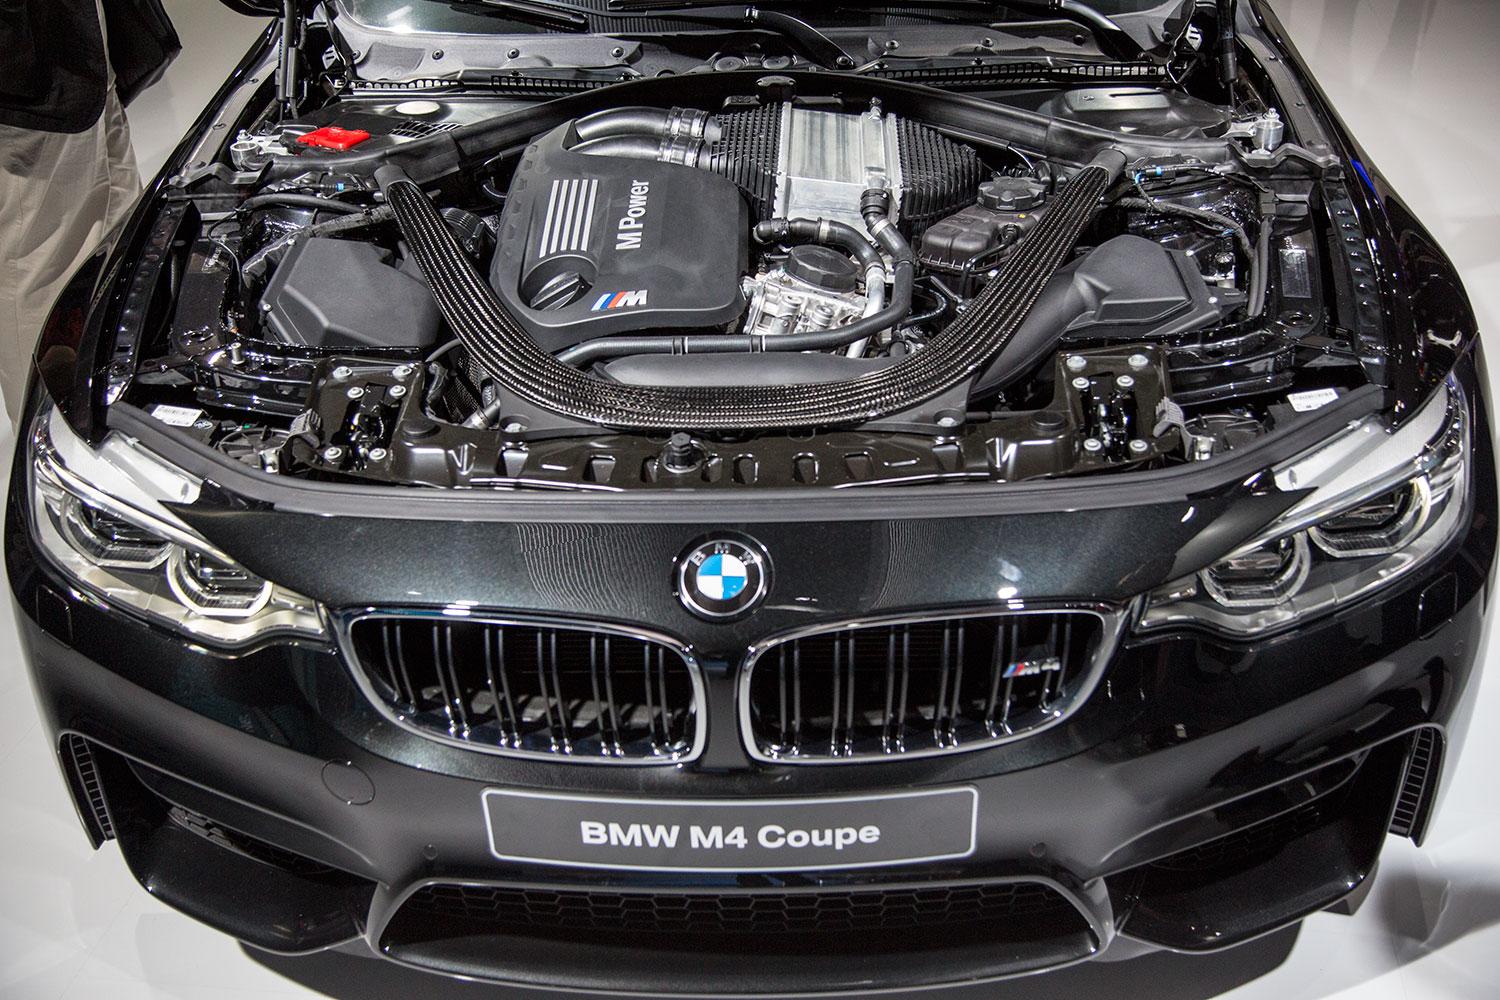 king back inline six bmw debuts new m3 m4 engine open